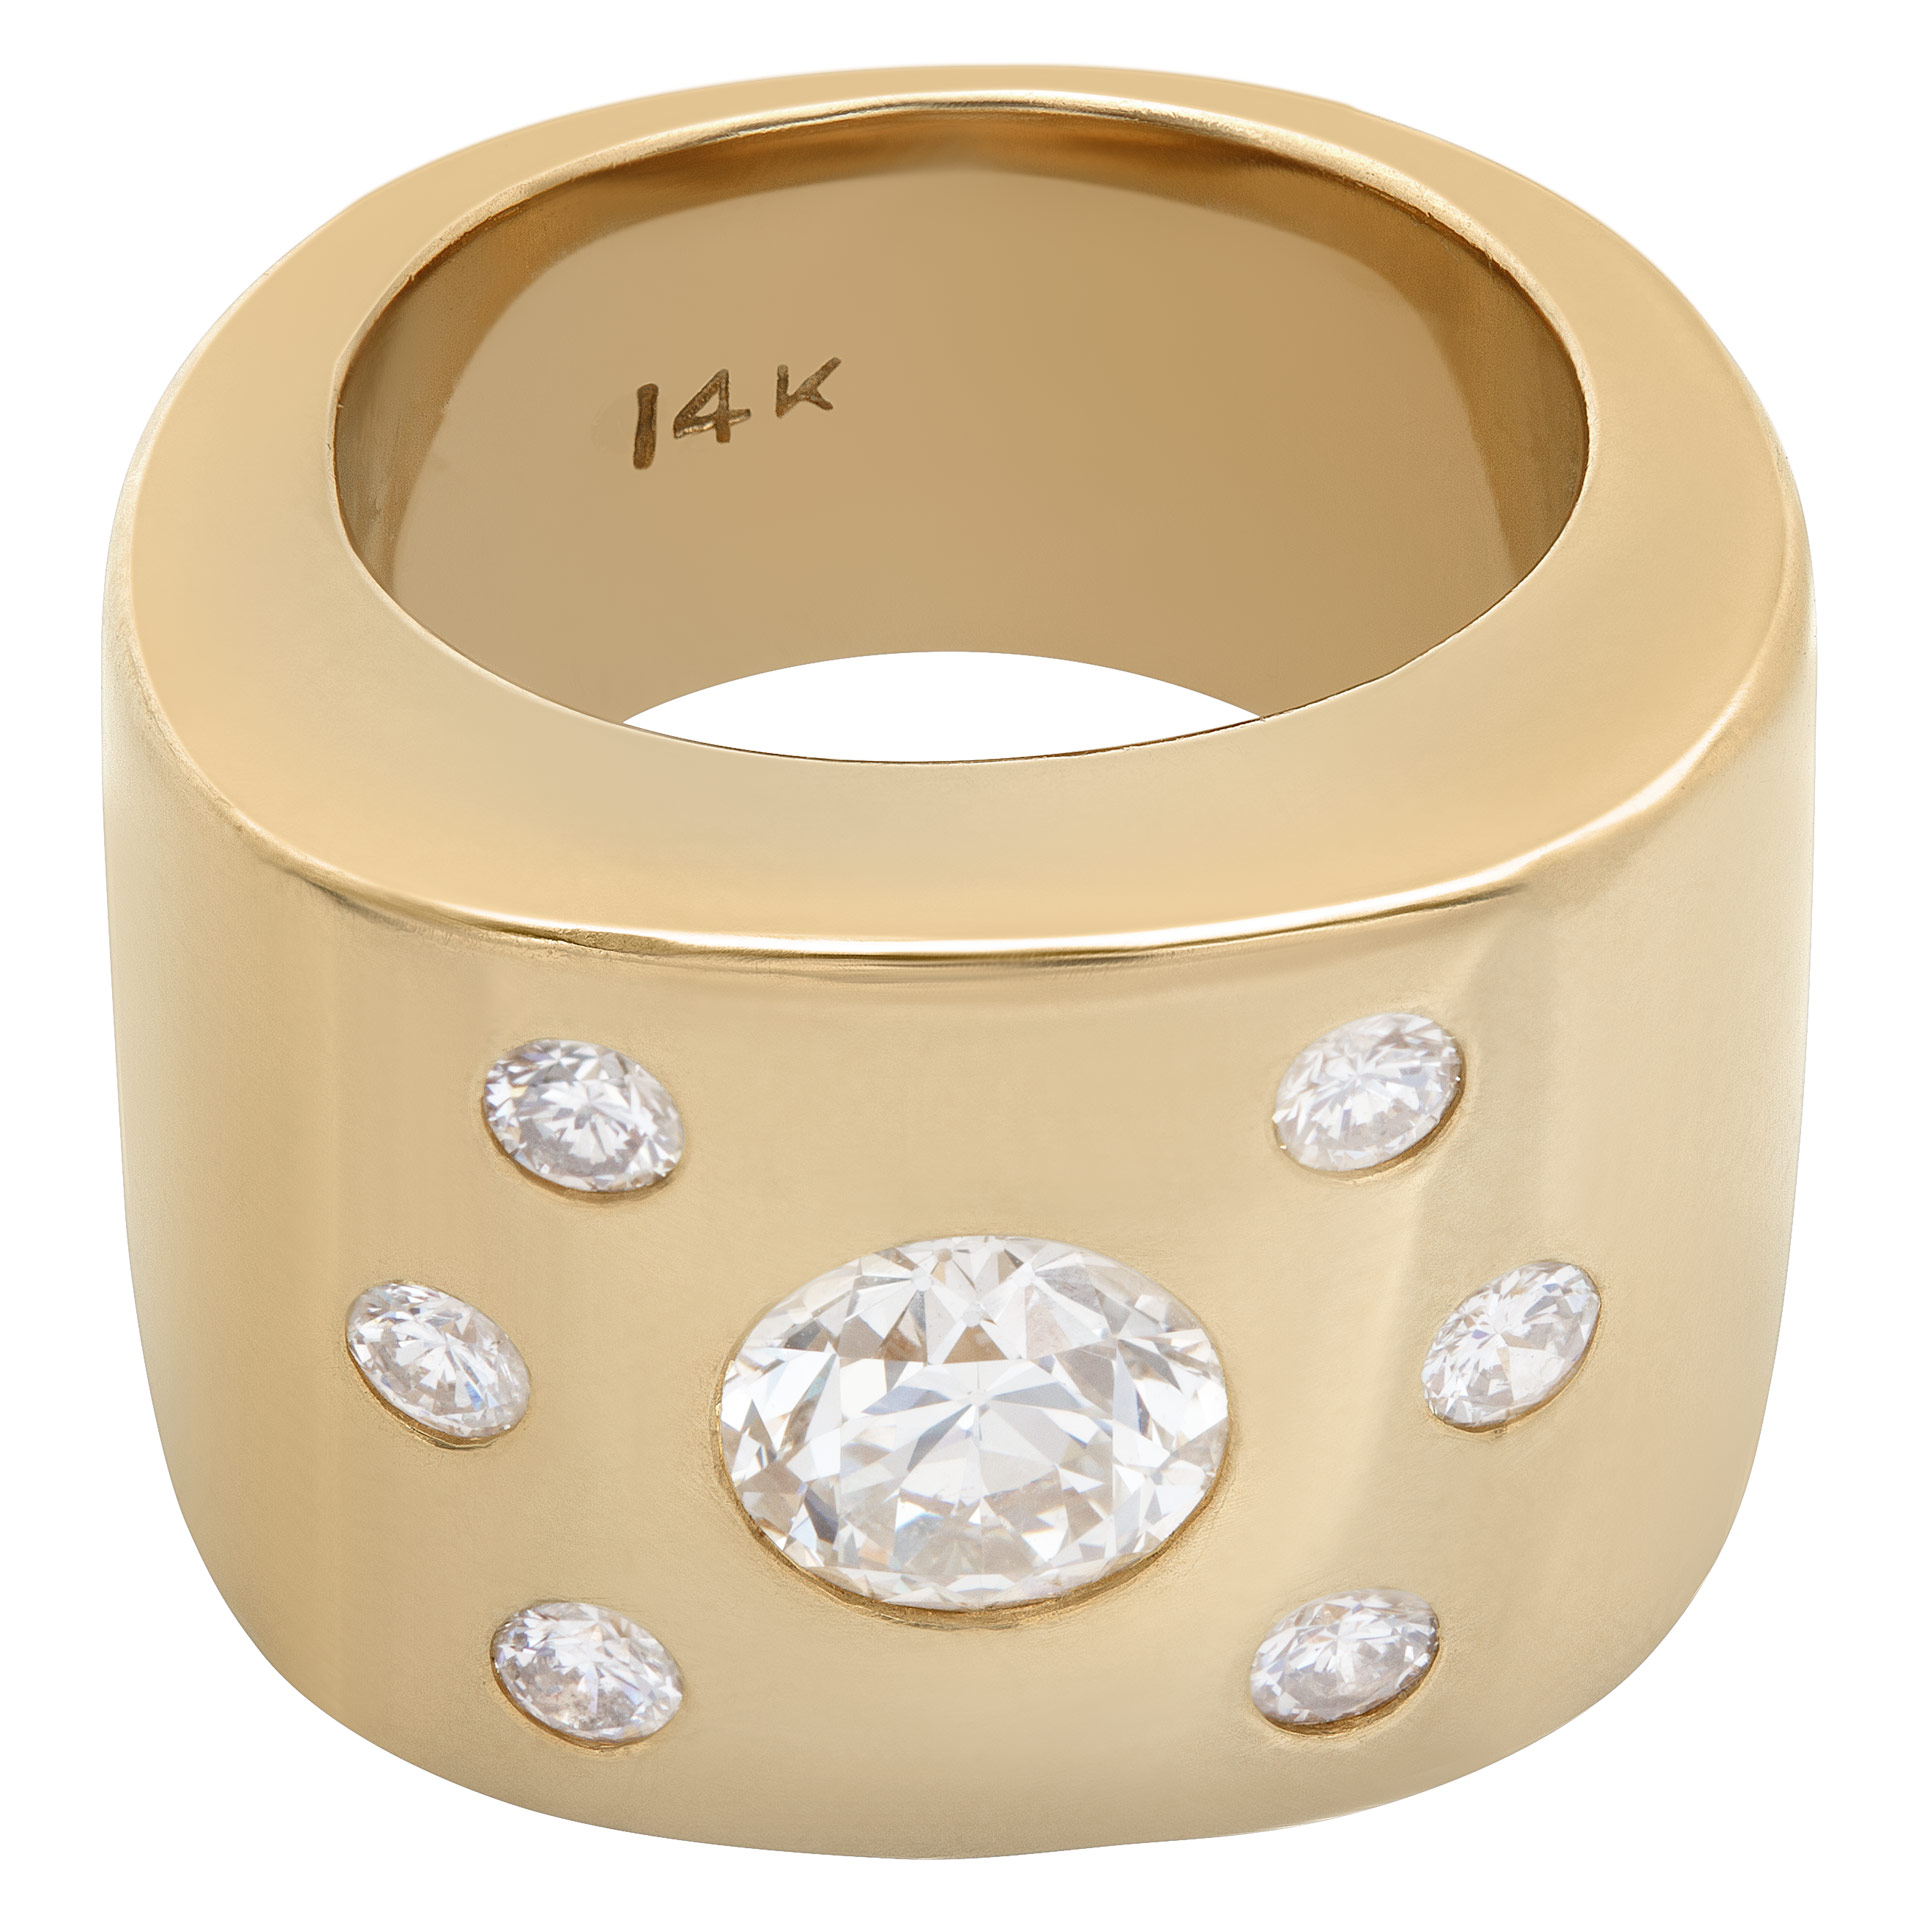 Wide diamonds ring in solid 14k yellow gold. Round brilliant cut diamonds total approx. weight: 1.42 carat,` image 3